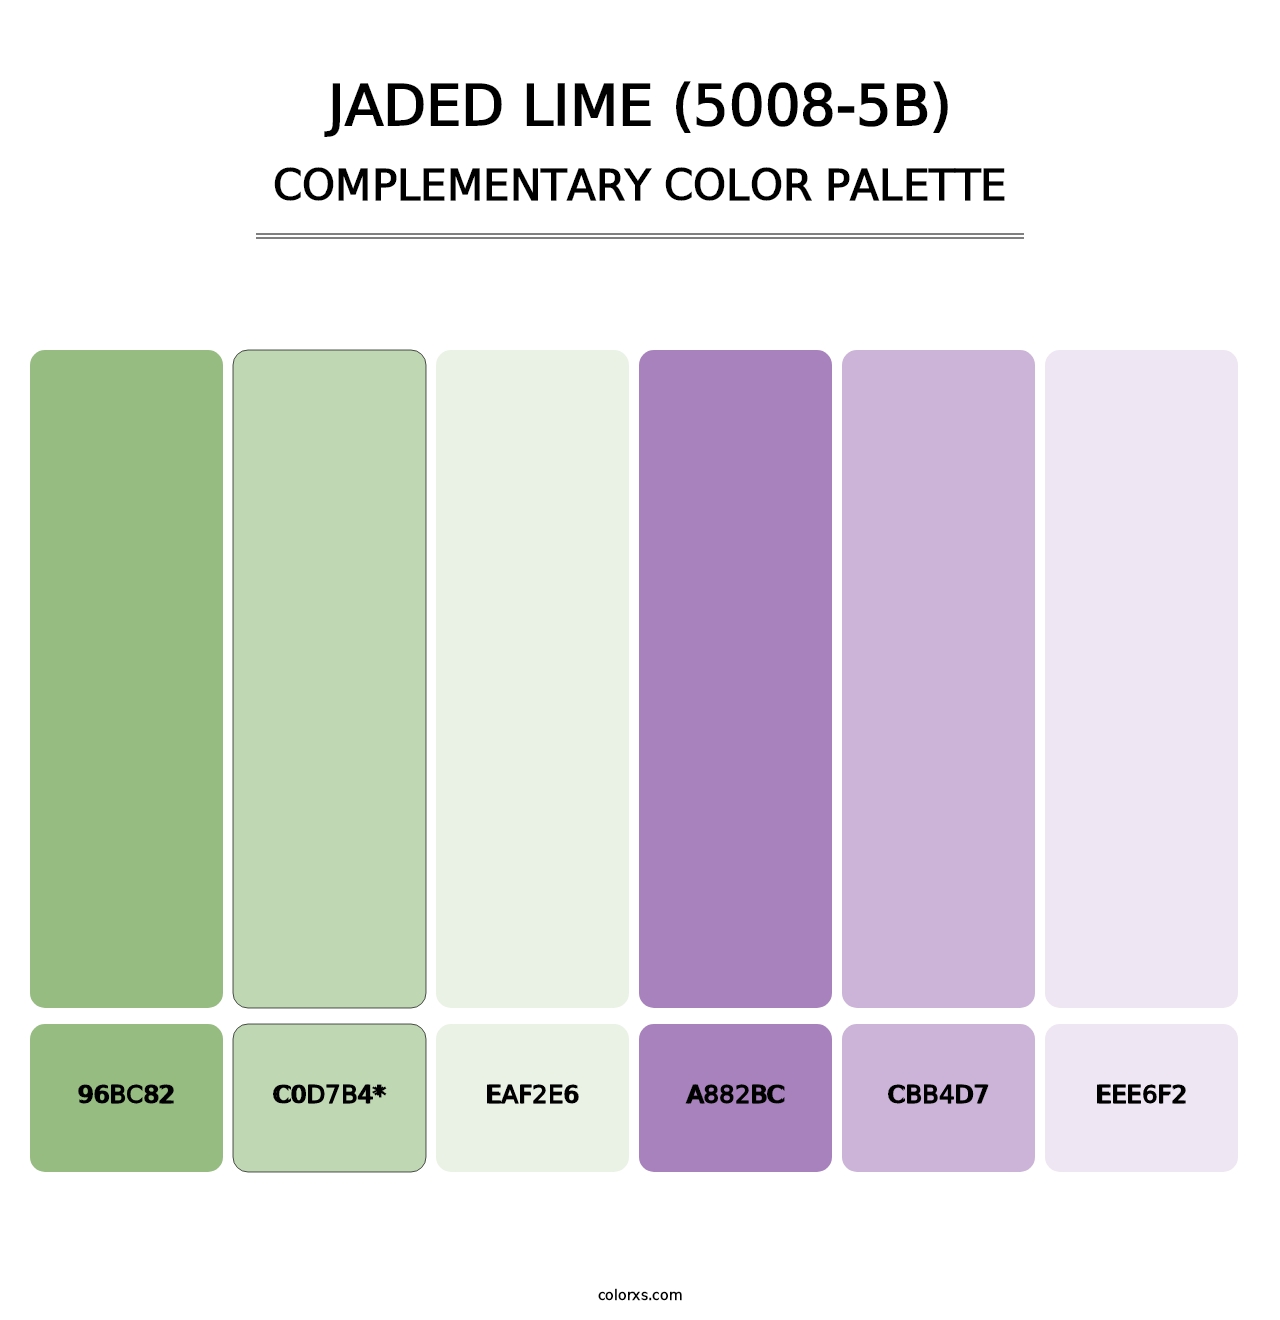 Jaded Lime (5008-5B) - Complementary Color Palette